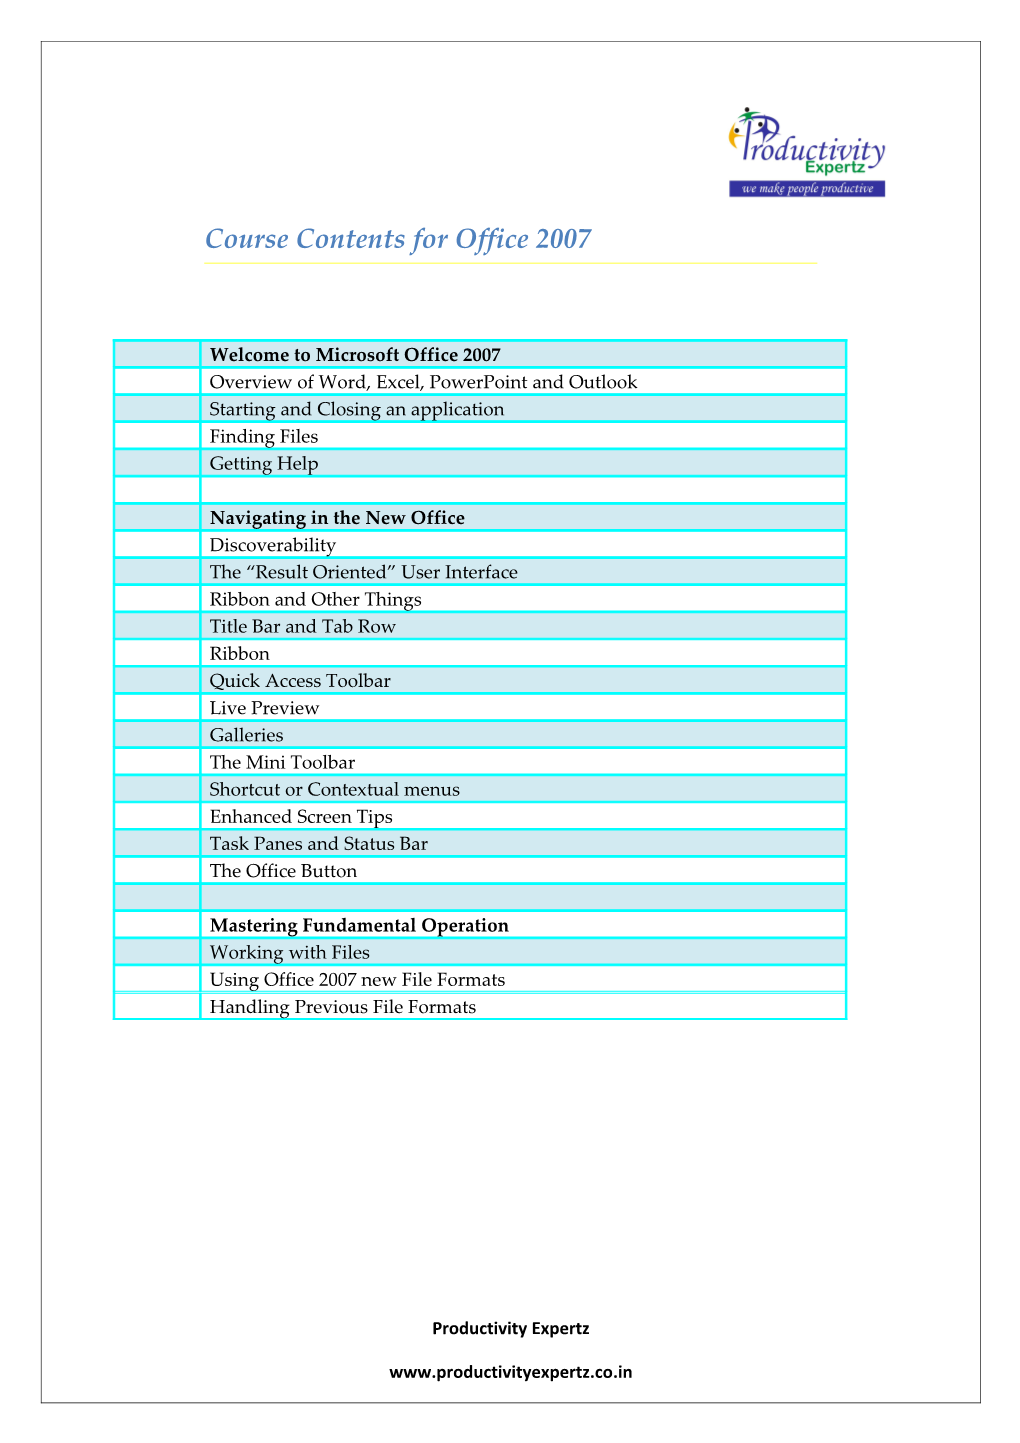 Course Contents for Office 2007